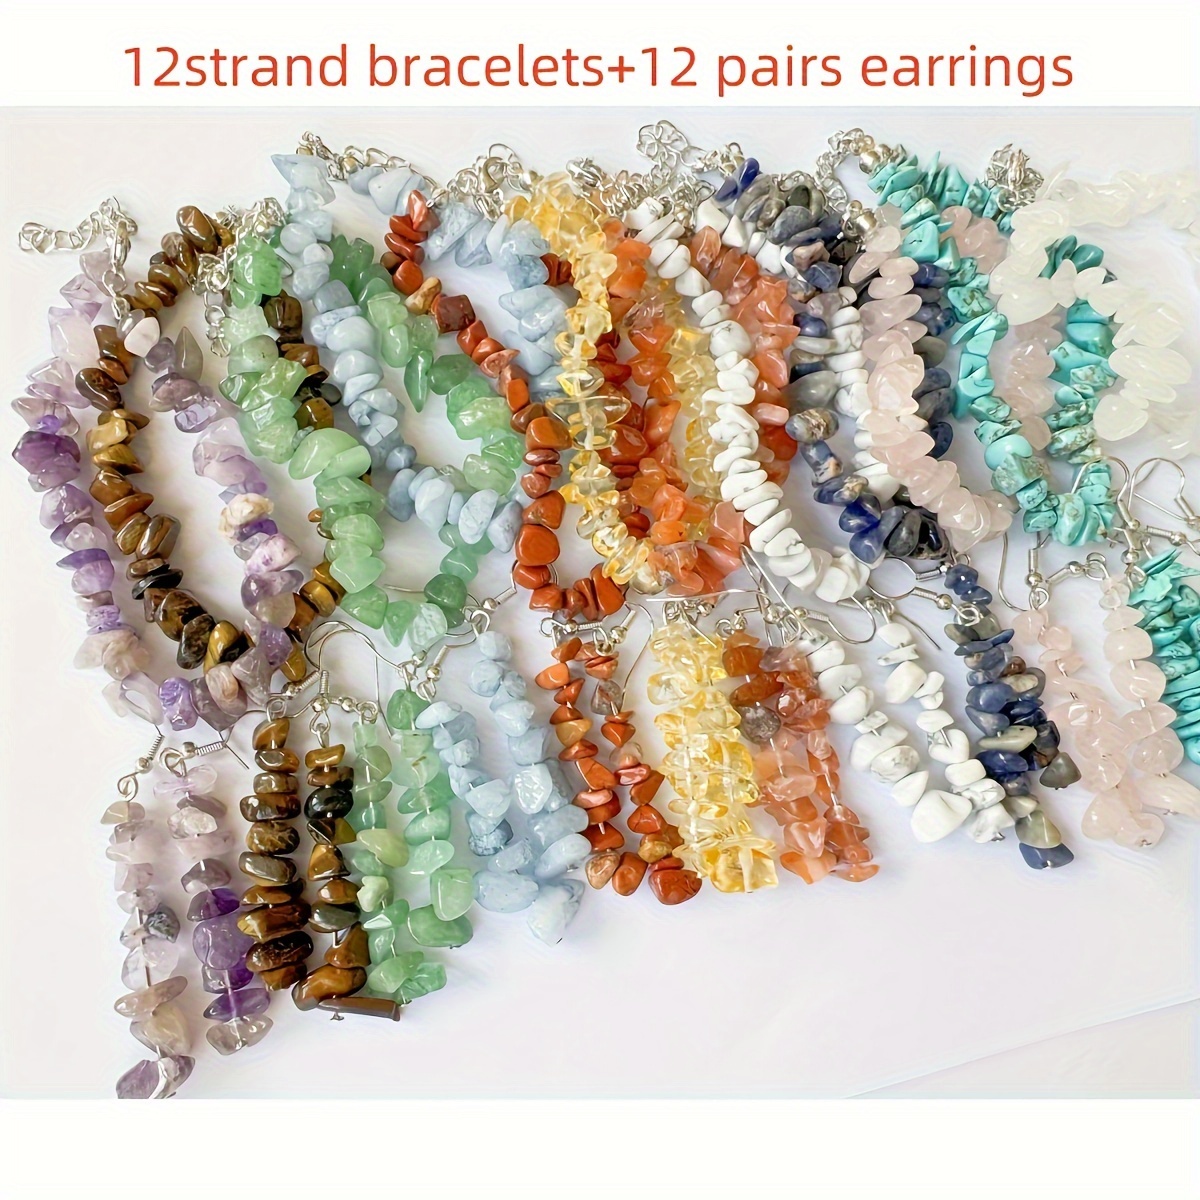 

36pcs/set Natural Stone Handcrafted Jewelry Set, Bohemian Irregular Bracelets+earrings, Unique Design Suitable For Both Men And Women To Wear On Daily Vacations (12pcs Bracelet+12pairs Earring)